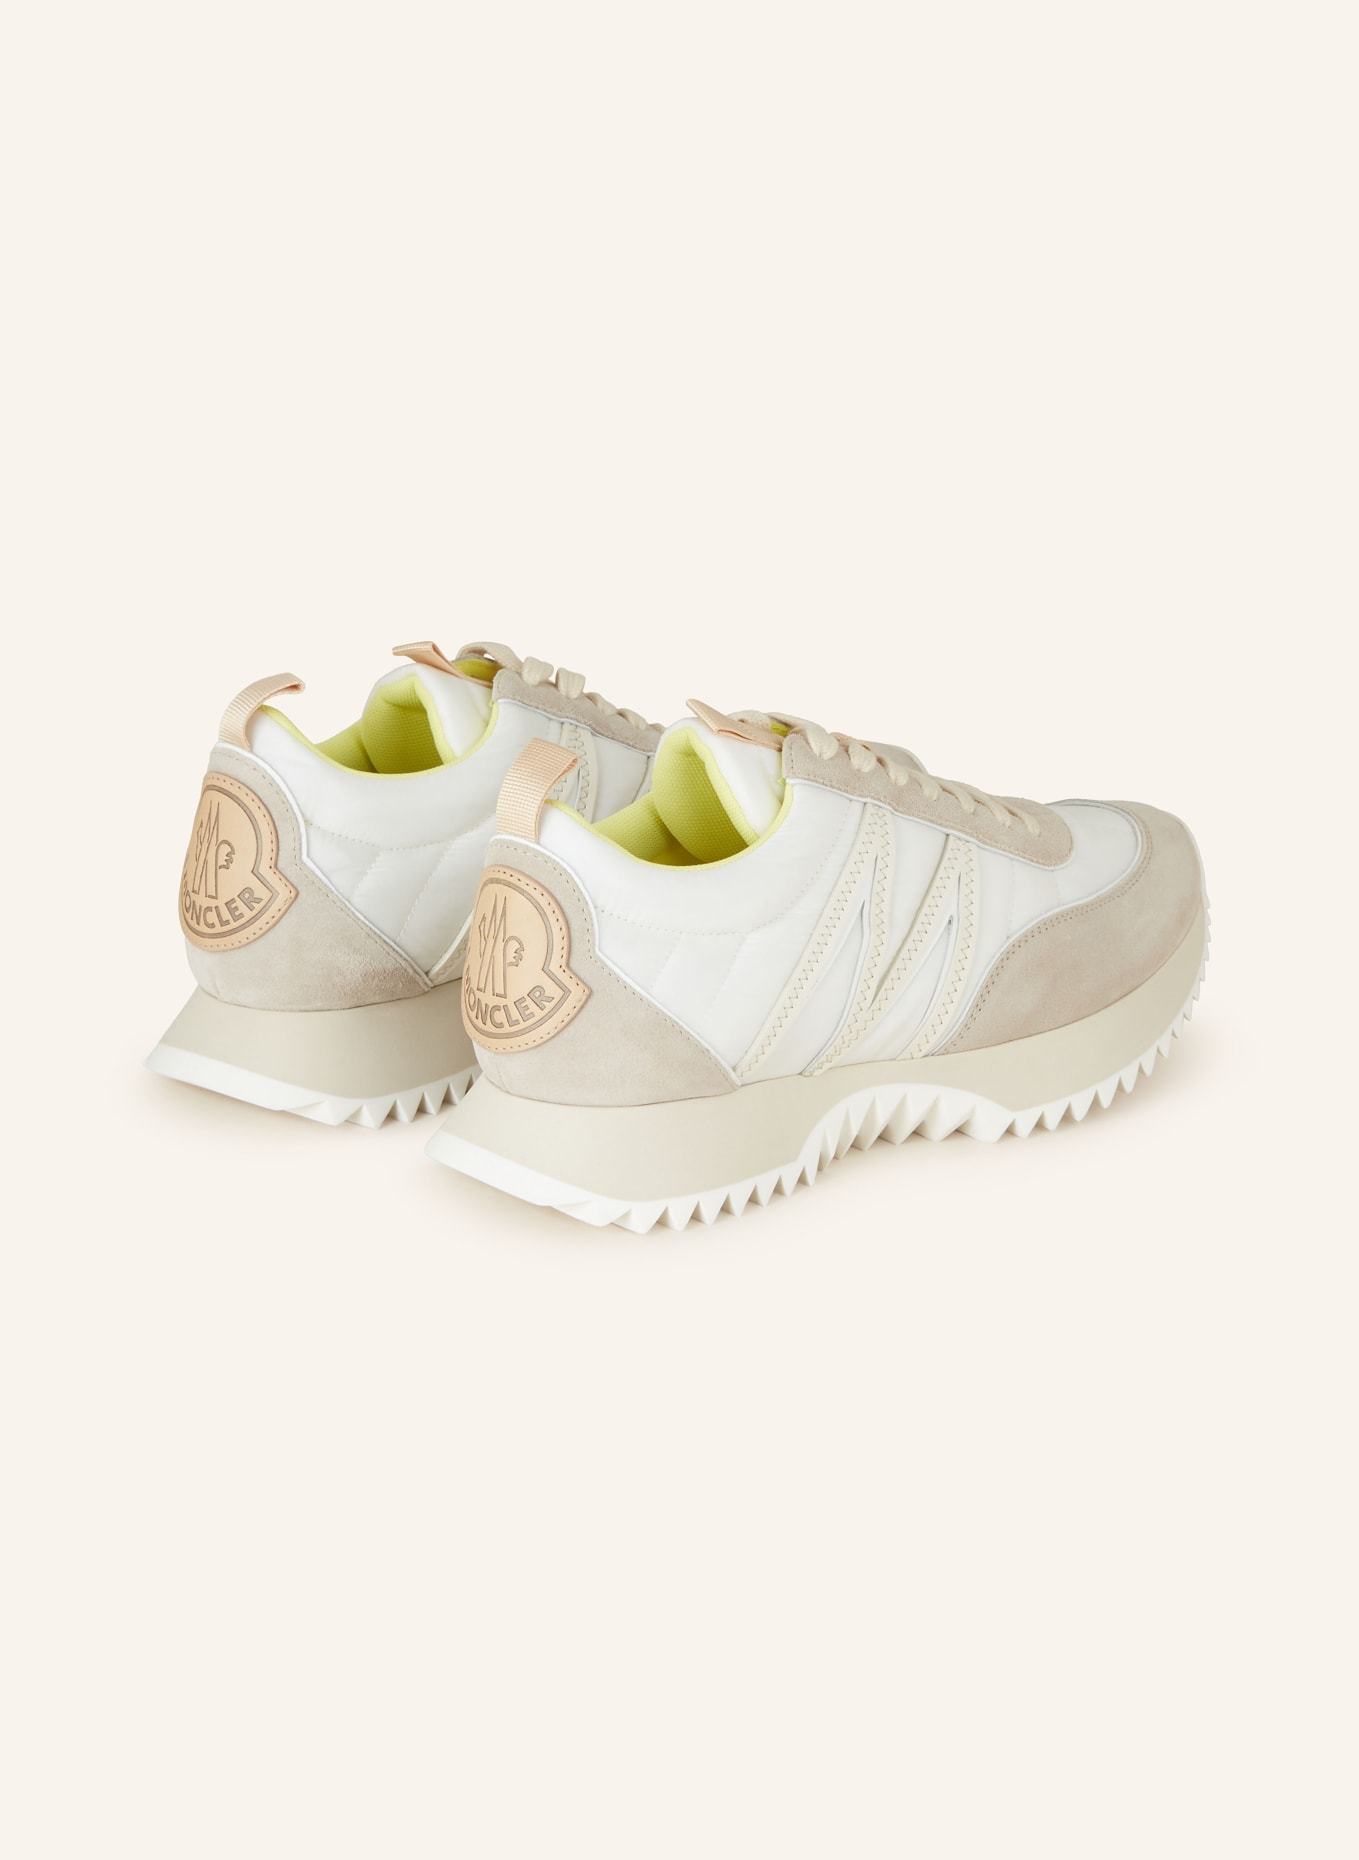 MONCLER Sneaker PACEY, Farbe: WEISS/ TAUPE/ ECRU (Bild 2)